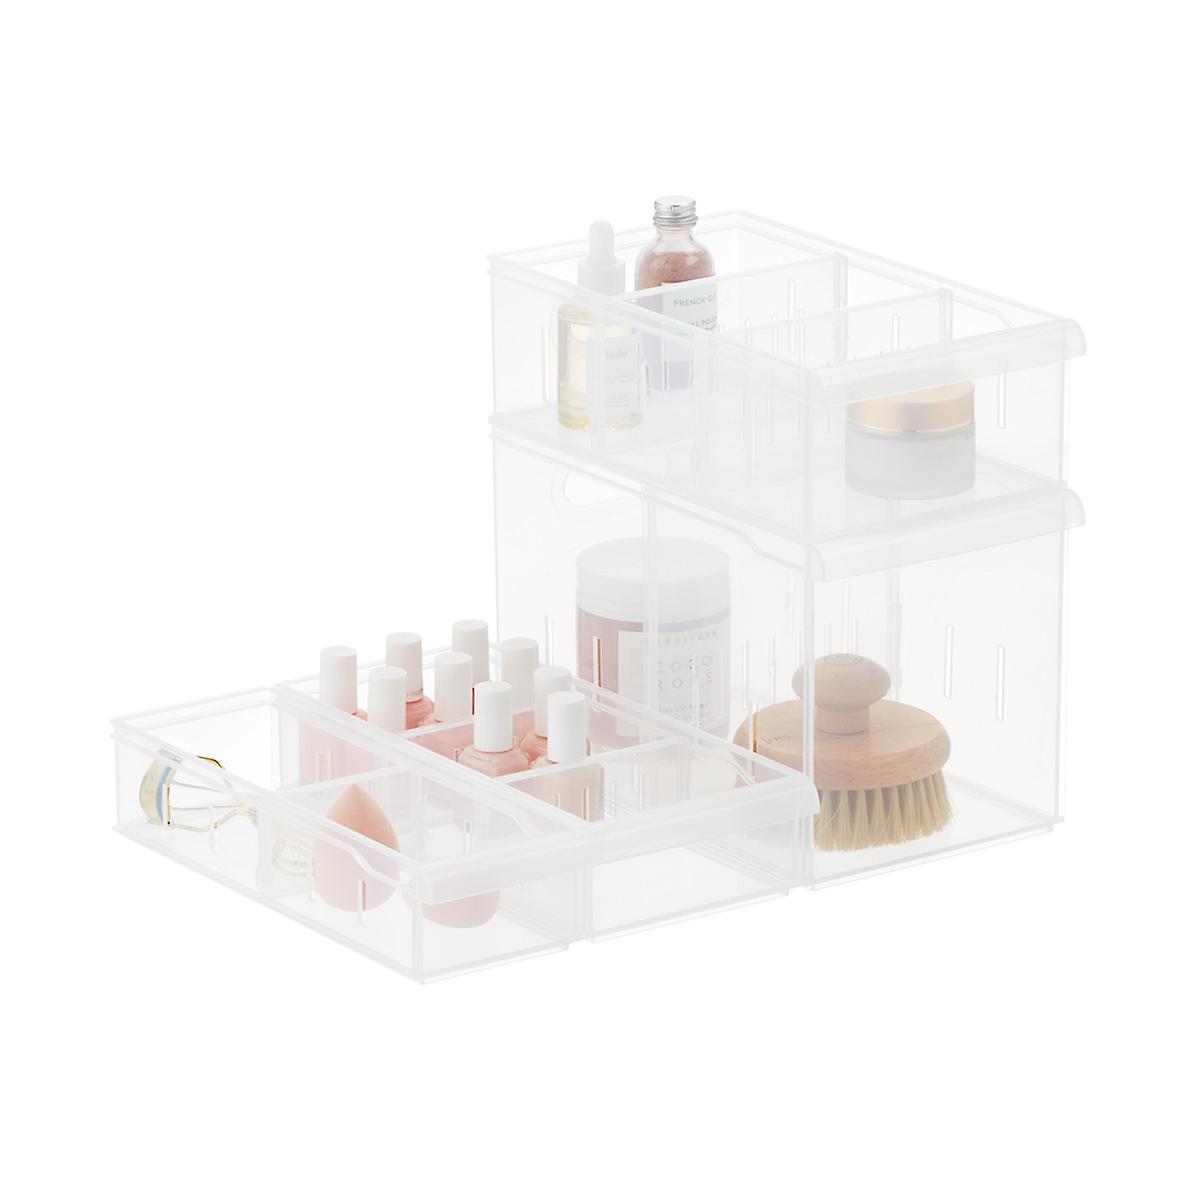 This product is a major game changer, according to a professional organizer. 